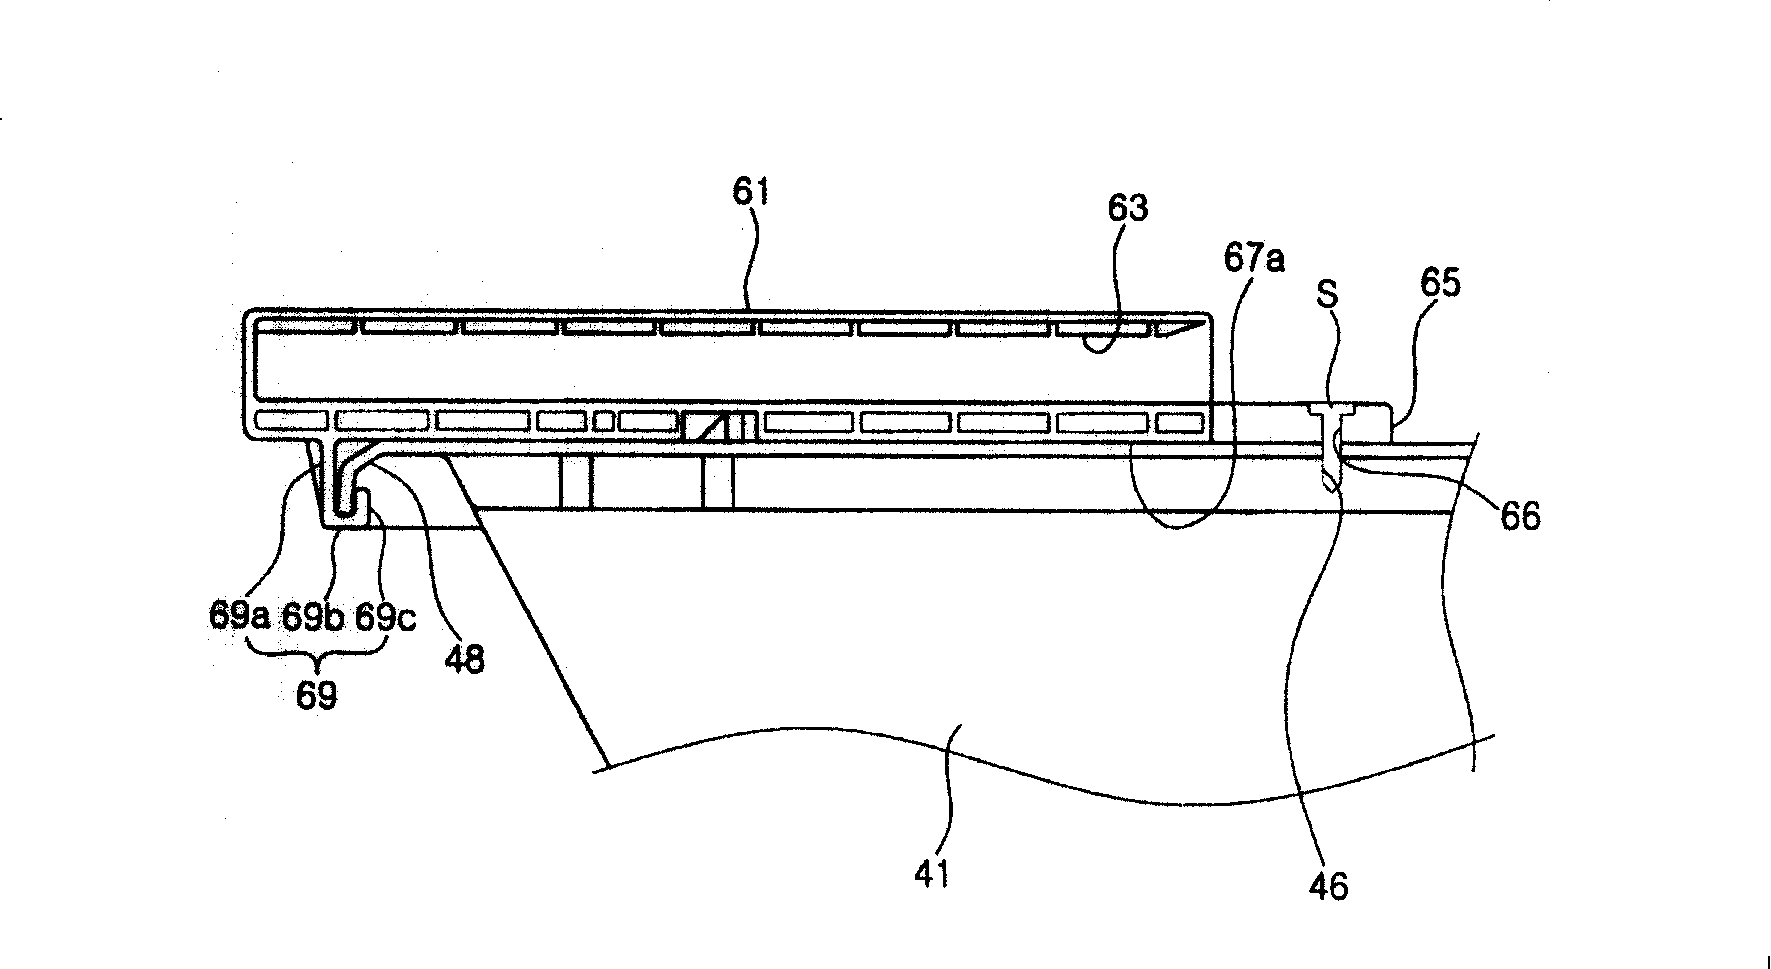 Pallet stretching-out device for refrigerator